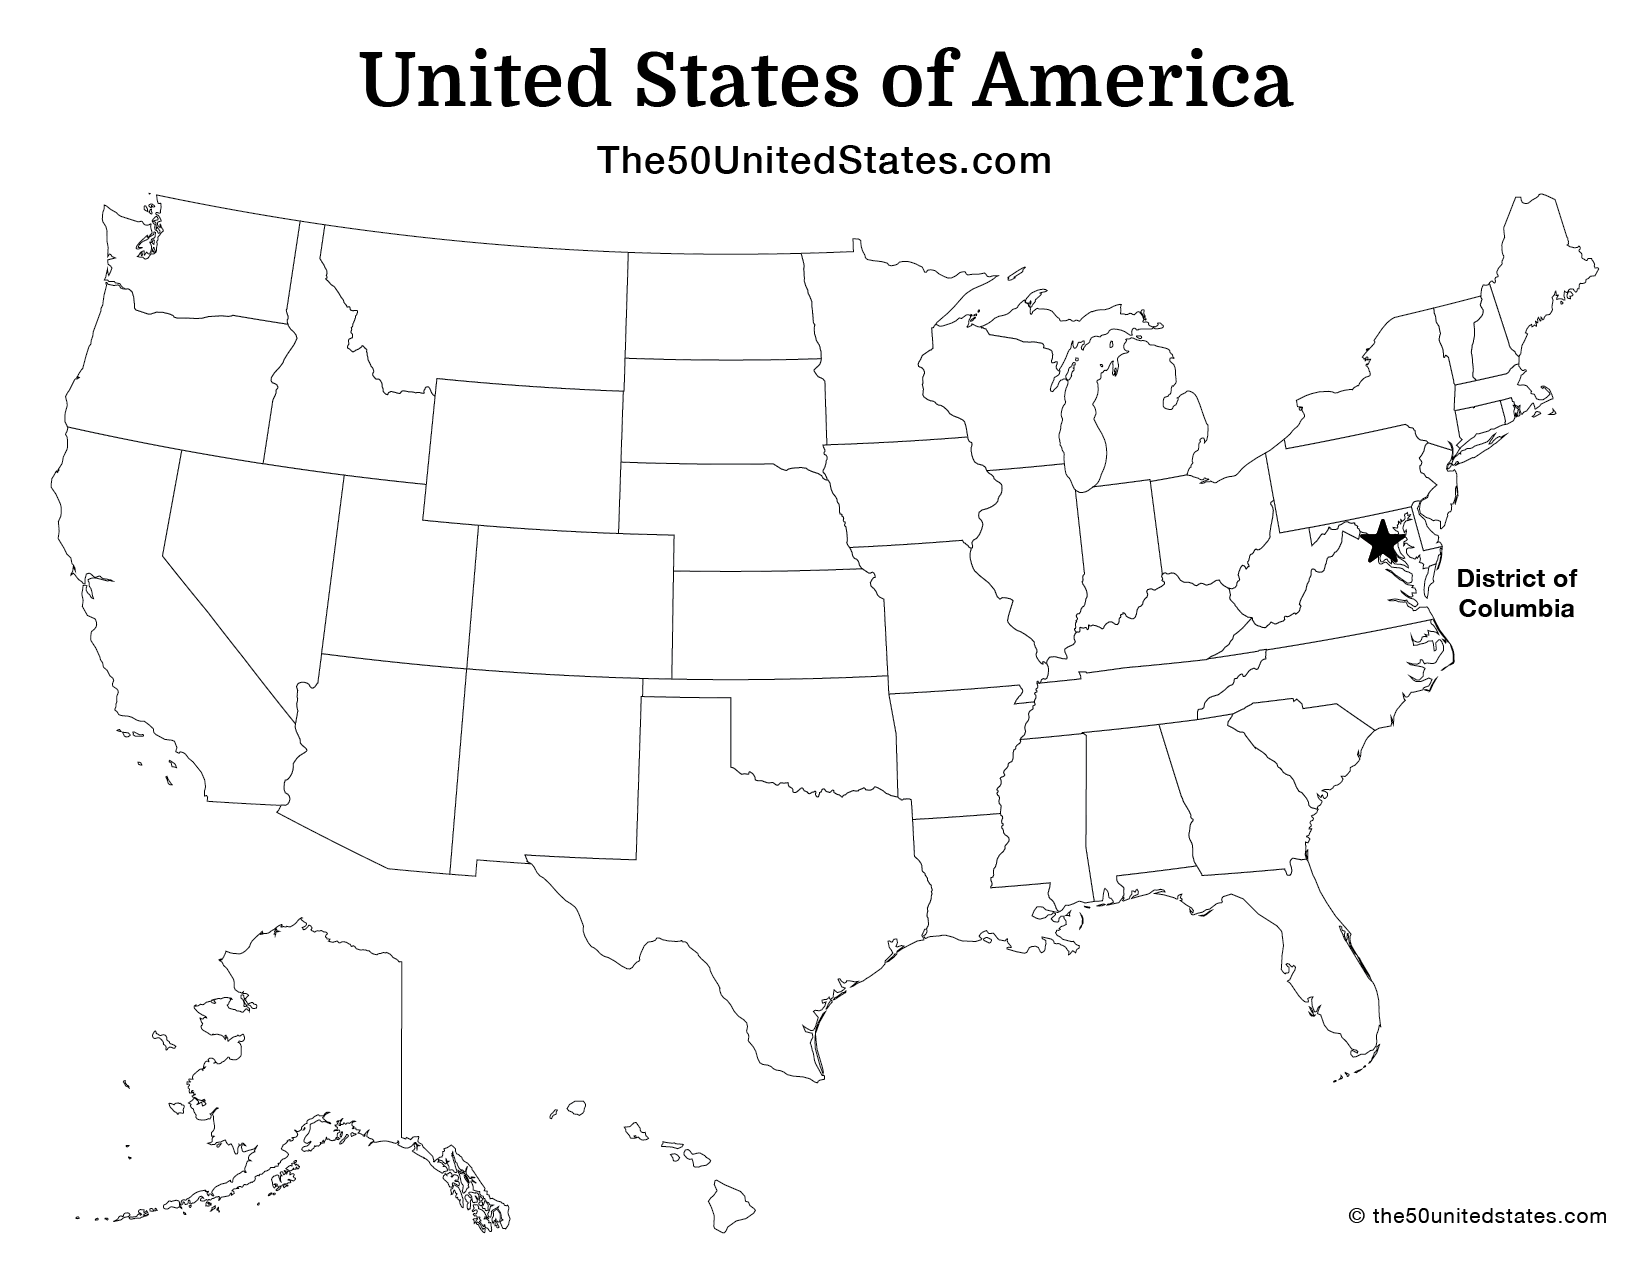 USA States with Capital (Labeled)